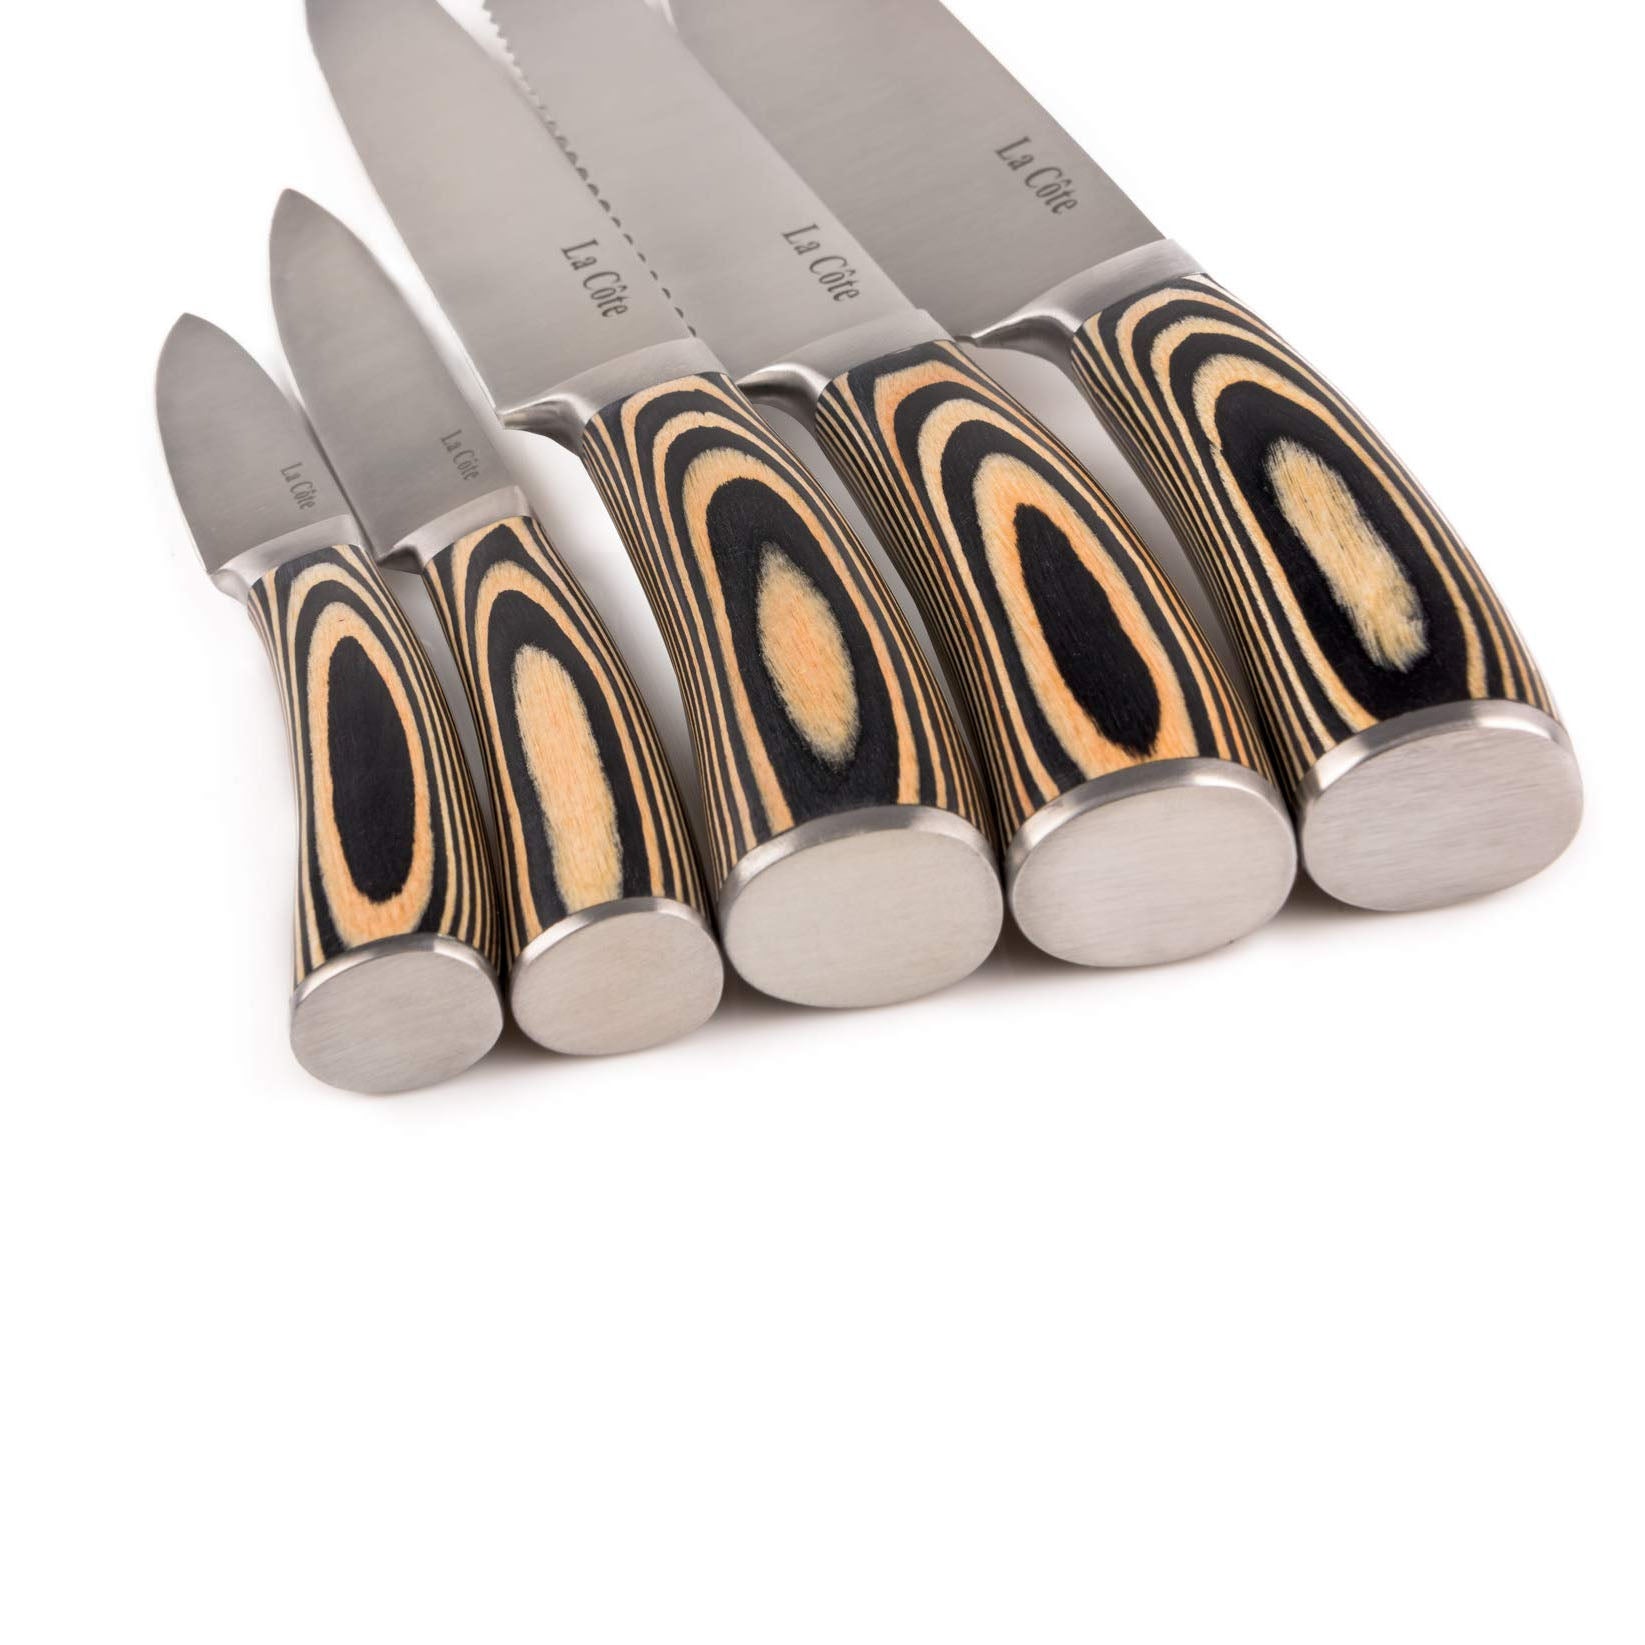 La Cote 5 Piece Chef Knives Set Japanese Stainless Steel Wood Handle with Block (Pakka Wood Zerba with Block)